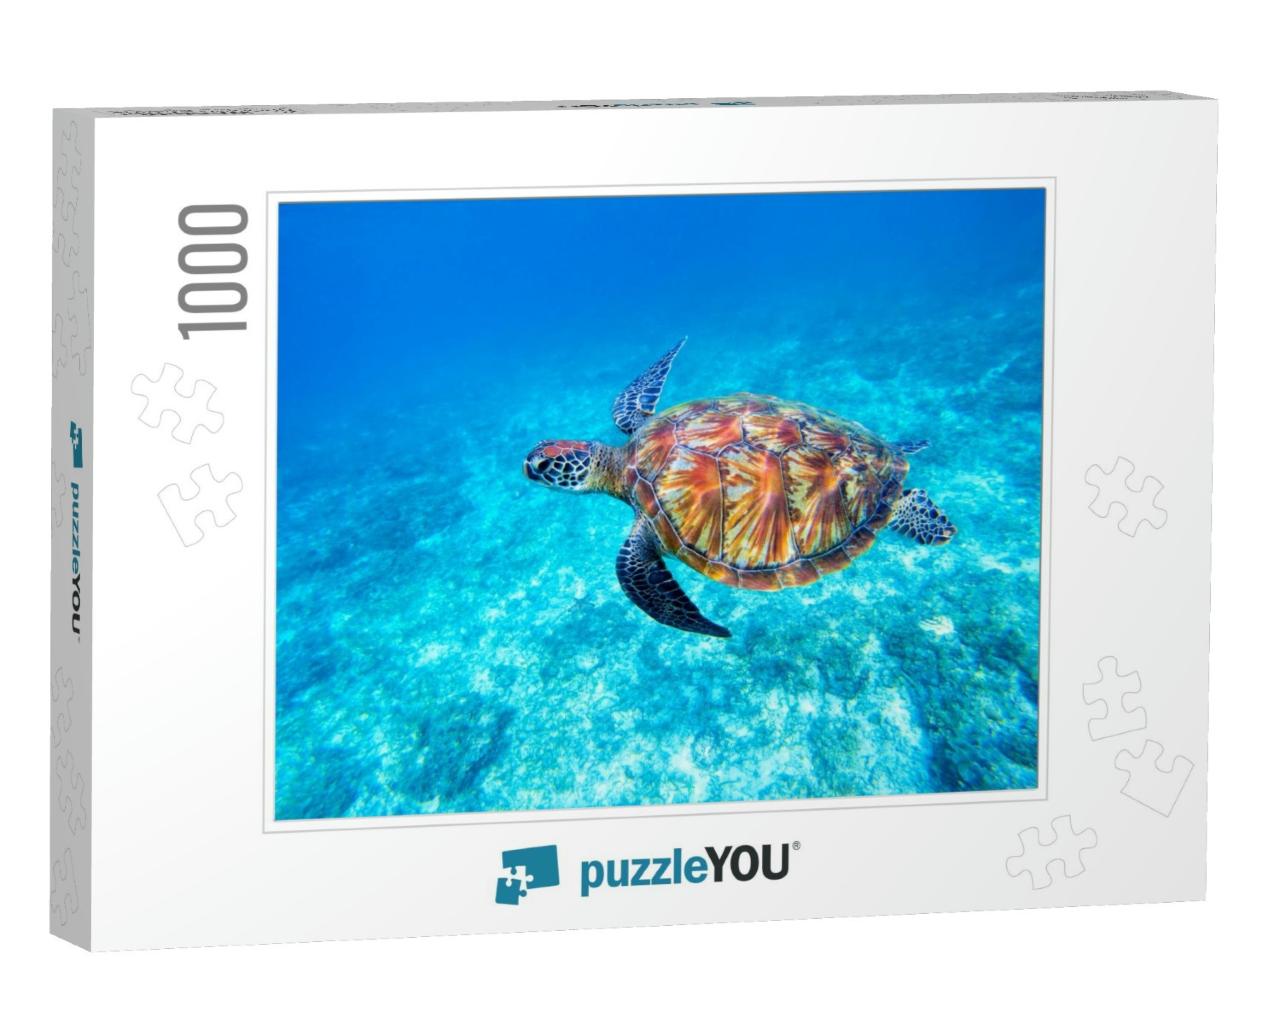 Green Sea Turtle in Shallow Seawater. Big Green Sea Turtl... Jigsaw Puzzle with 1000 pieces